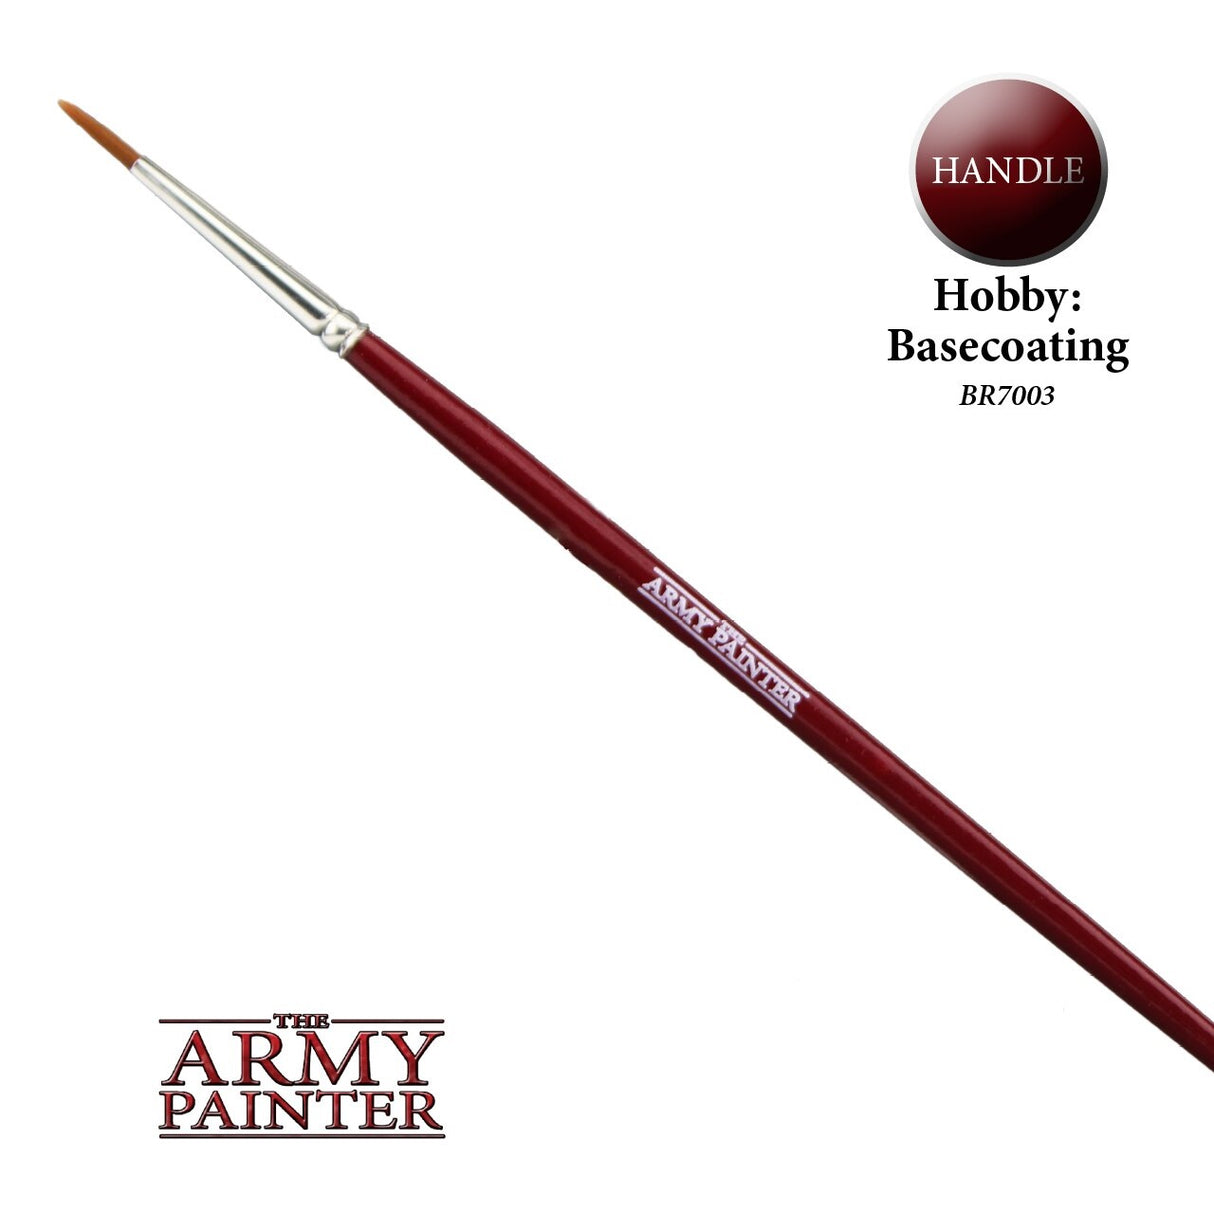 Army Painter BR7003 Hobby: Basecoating Brush The Army Painter PAINT, BRUSHES & SUPPLIES